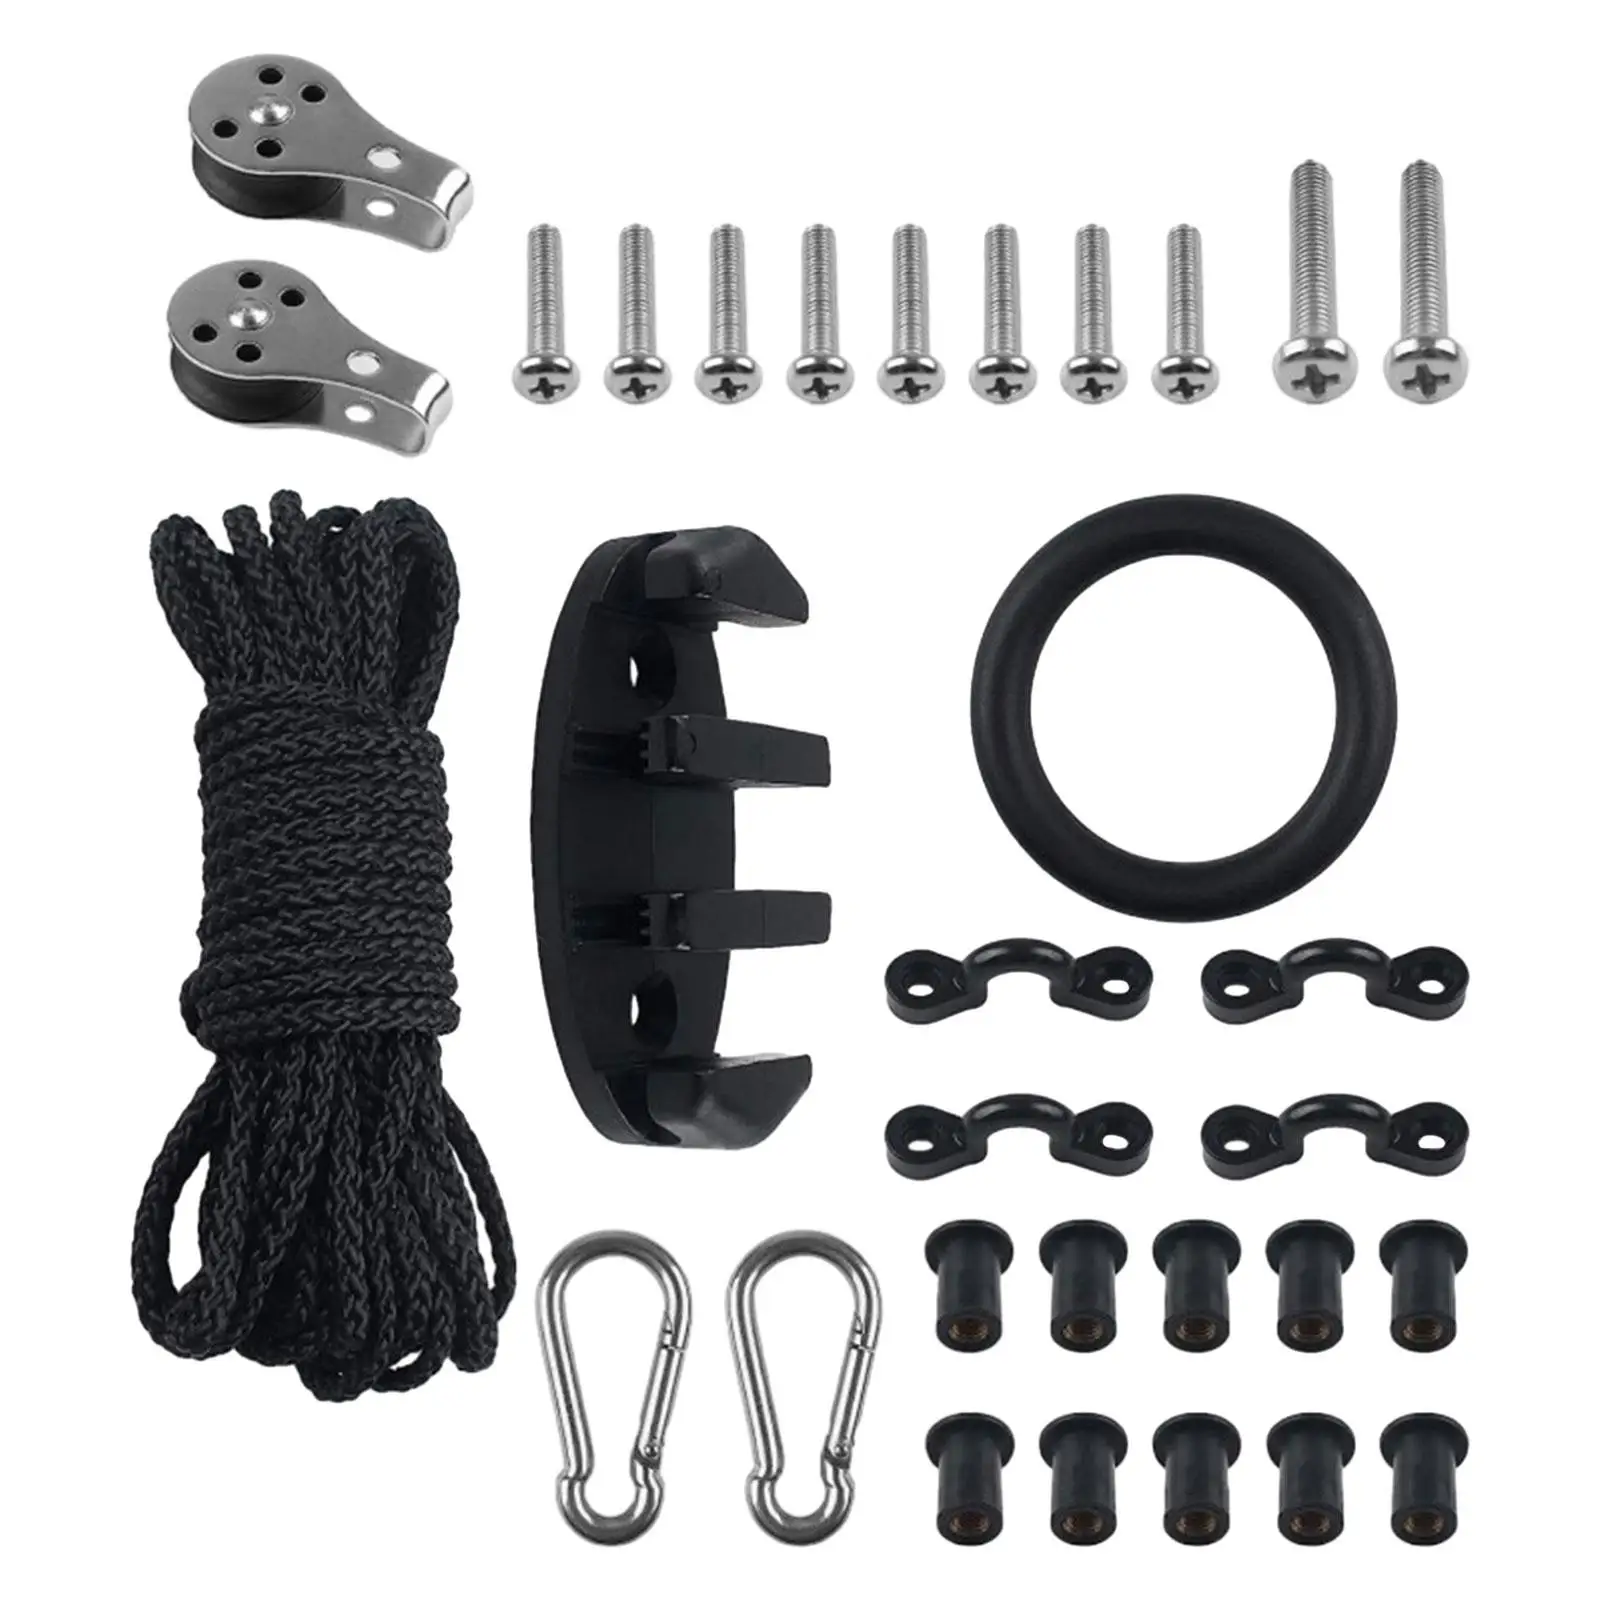 

31x Kayak Canoe Anchor Trolley Kit Portable Zig Zag Cleat for Rubber Dinghy